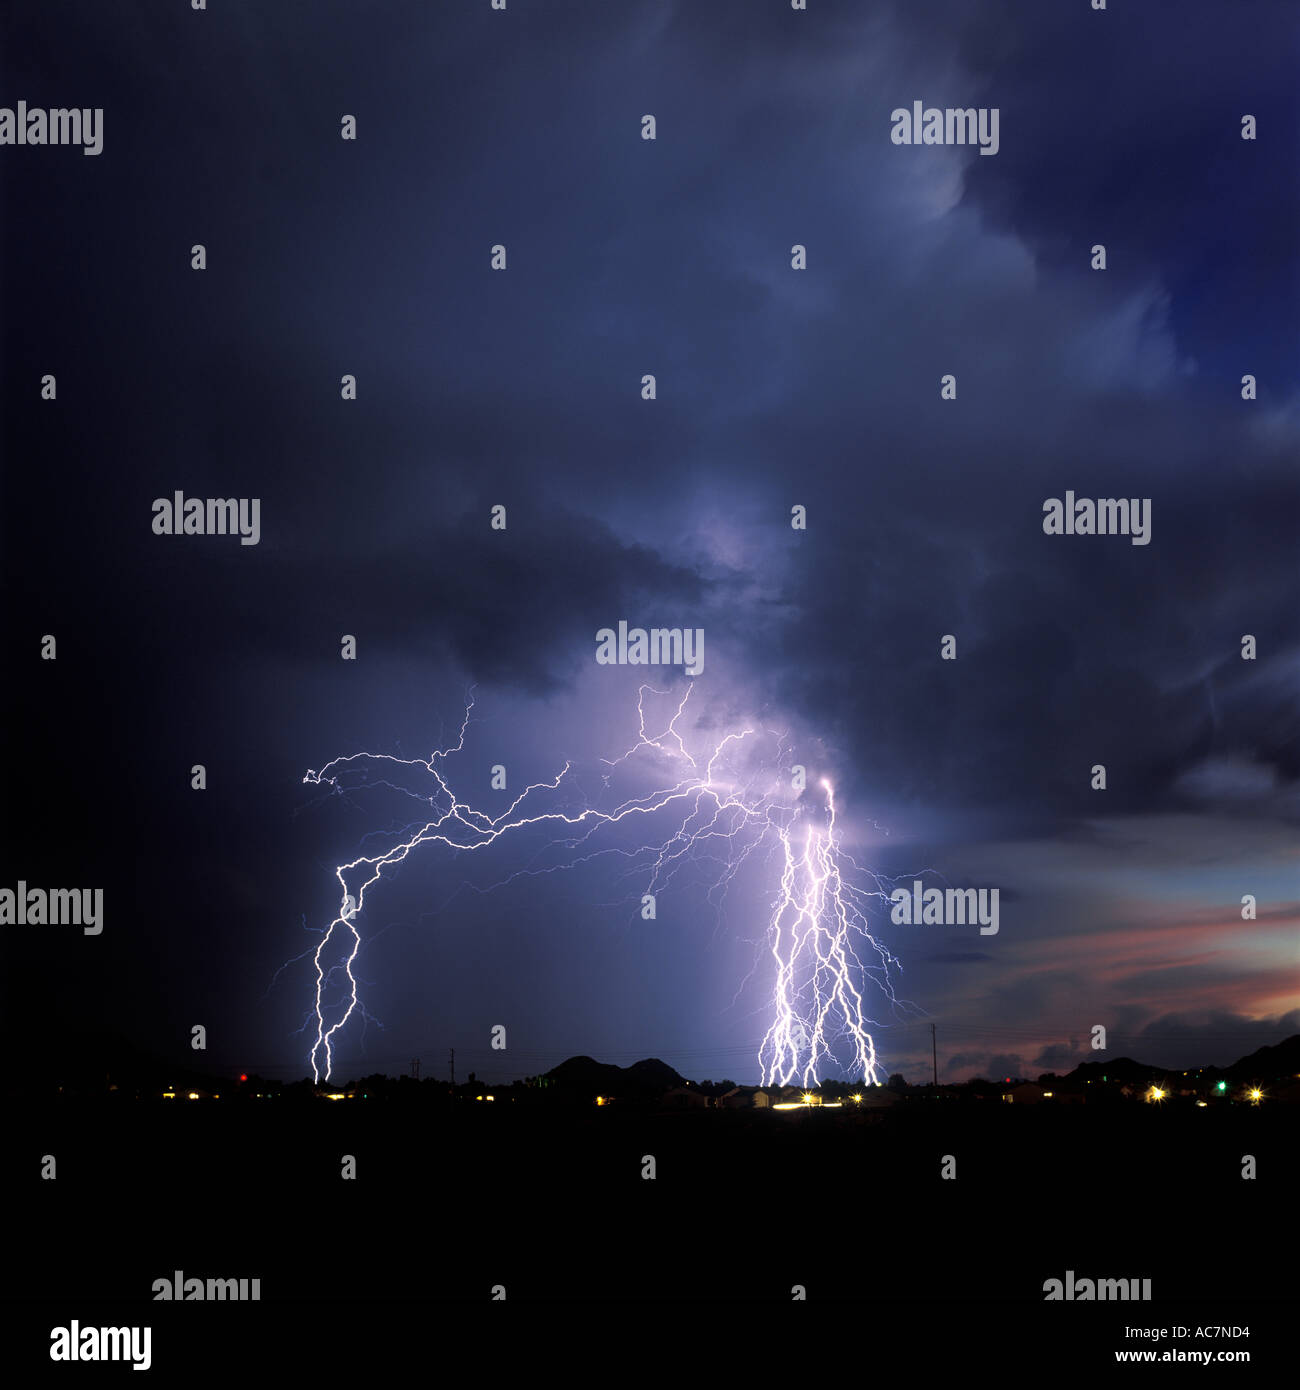 Lightning strikes over a city dotted with glowing lights from a dark blue stormy sky in Southern Arizona during a monsoon storm. Stock Photo